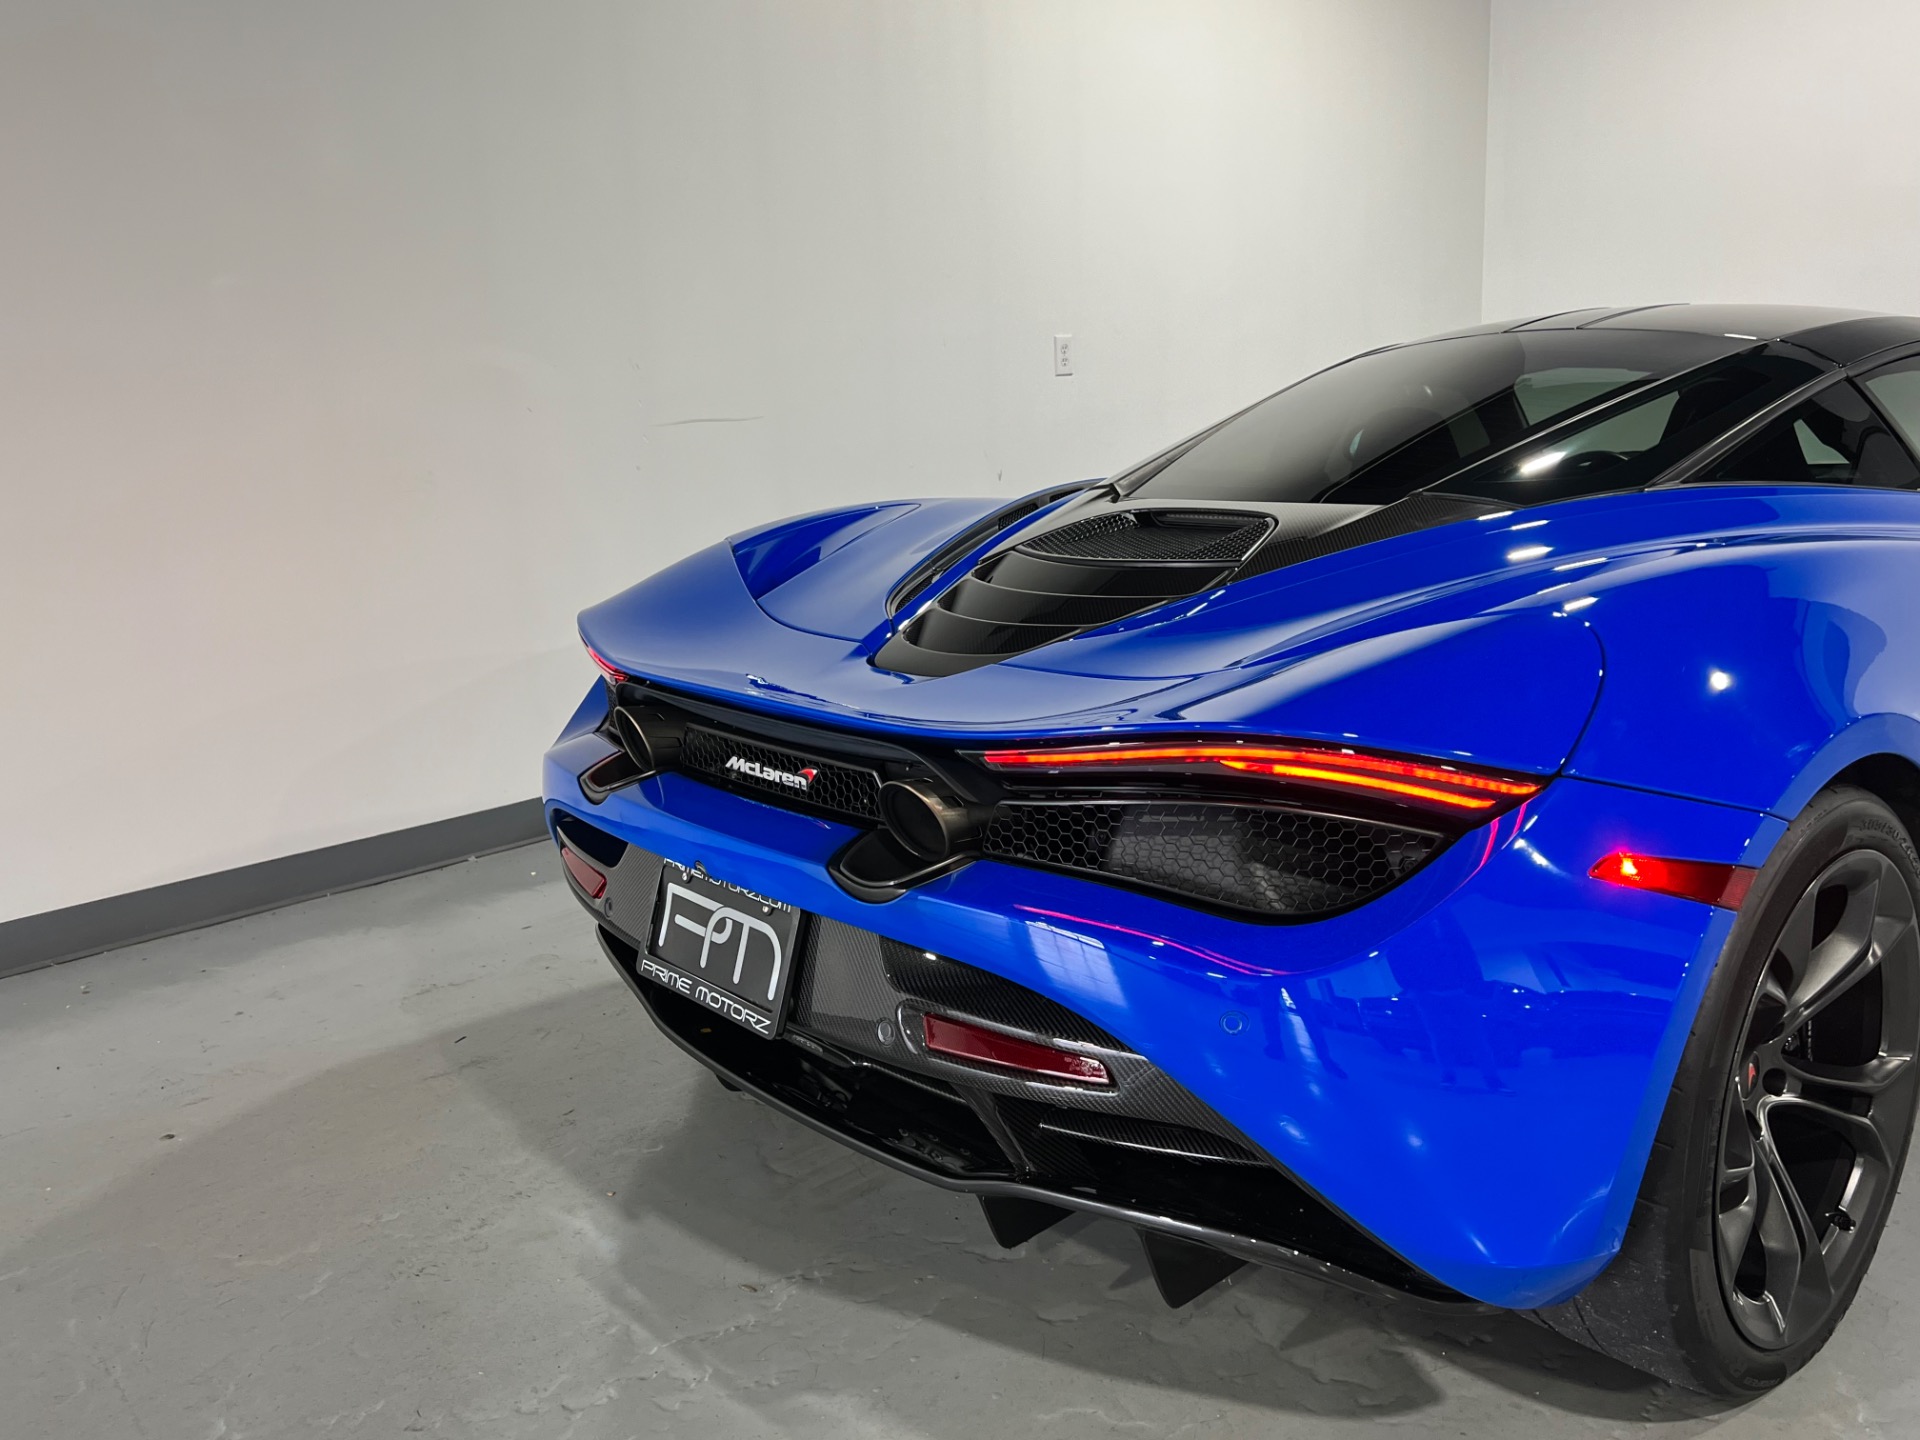 Used 2018 Paris Blue McLaren 720S Performance Coupe Twin turbo V8 720HP  Performance For Sale (Sold)